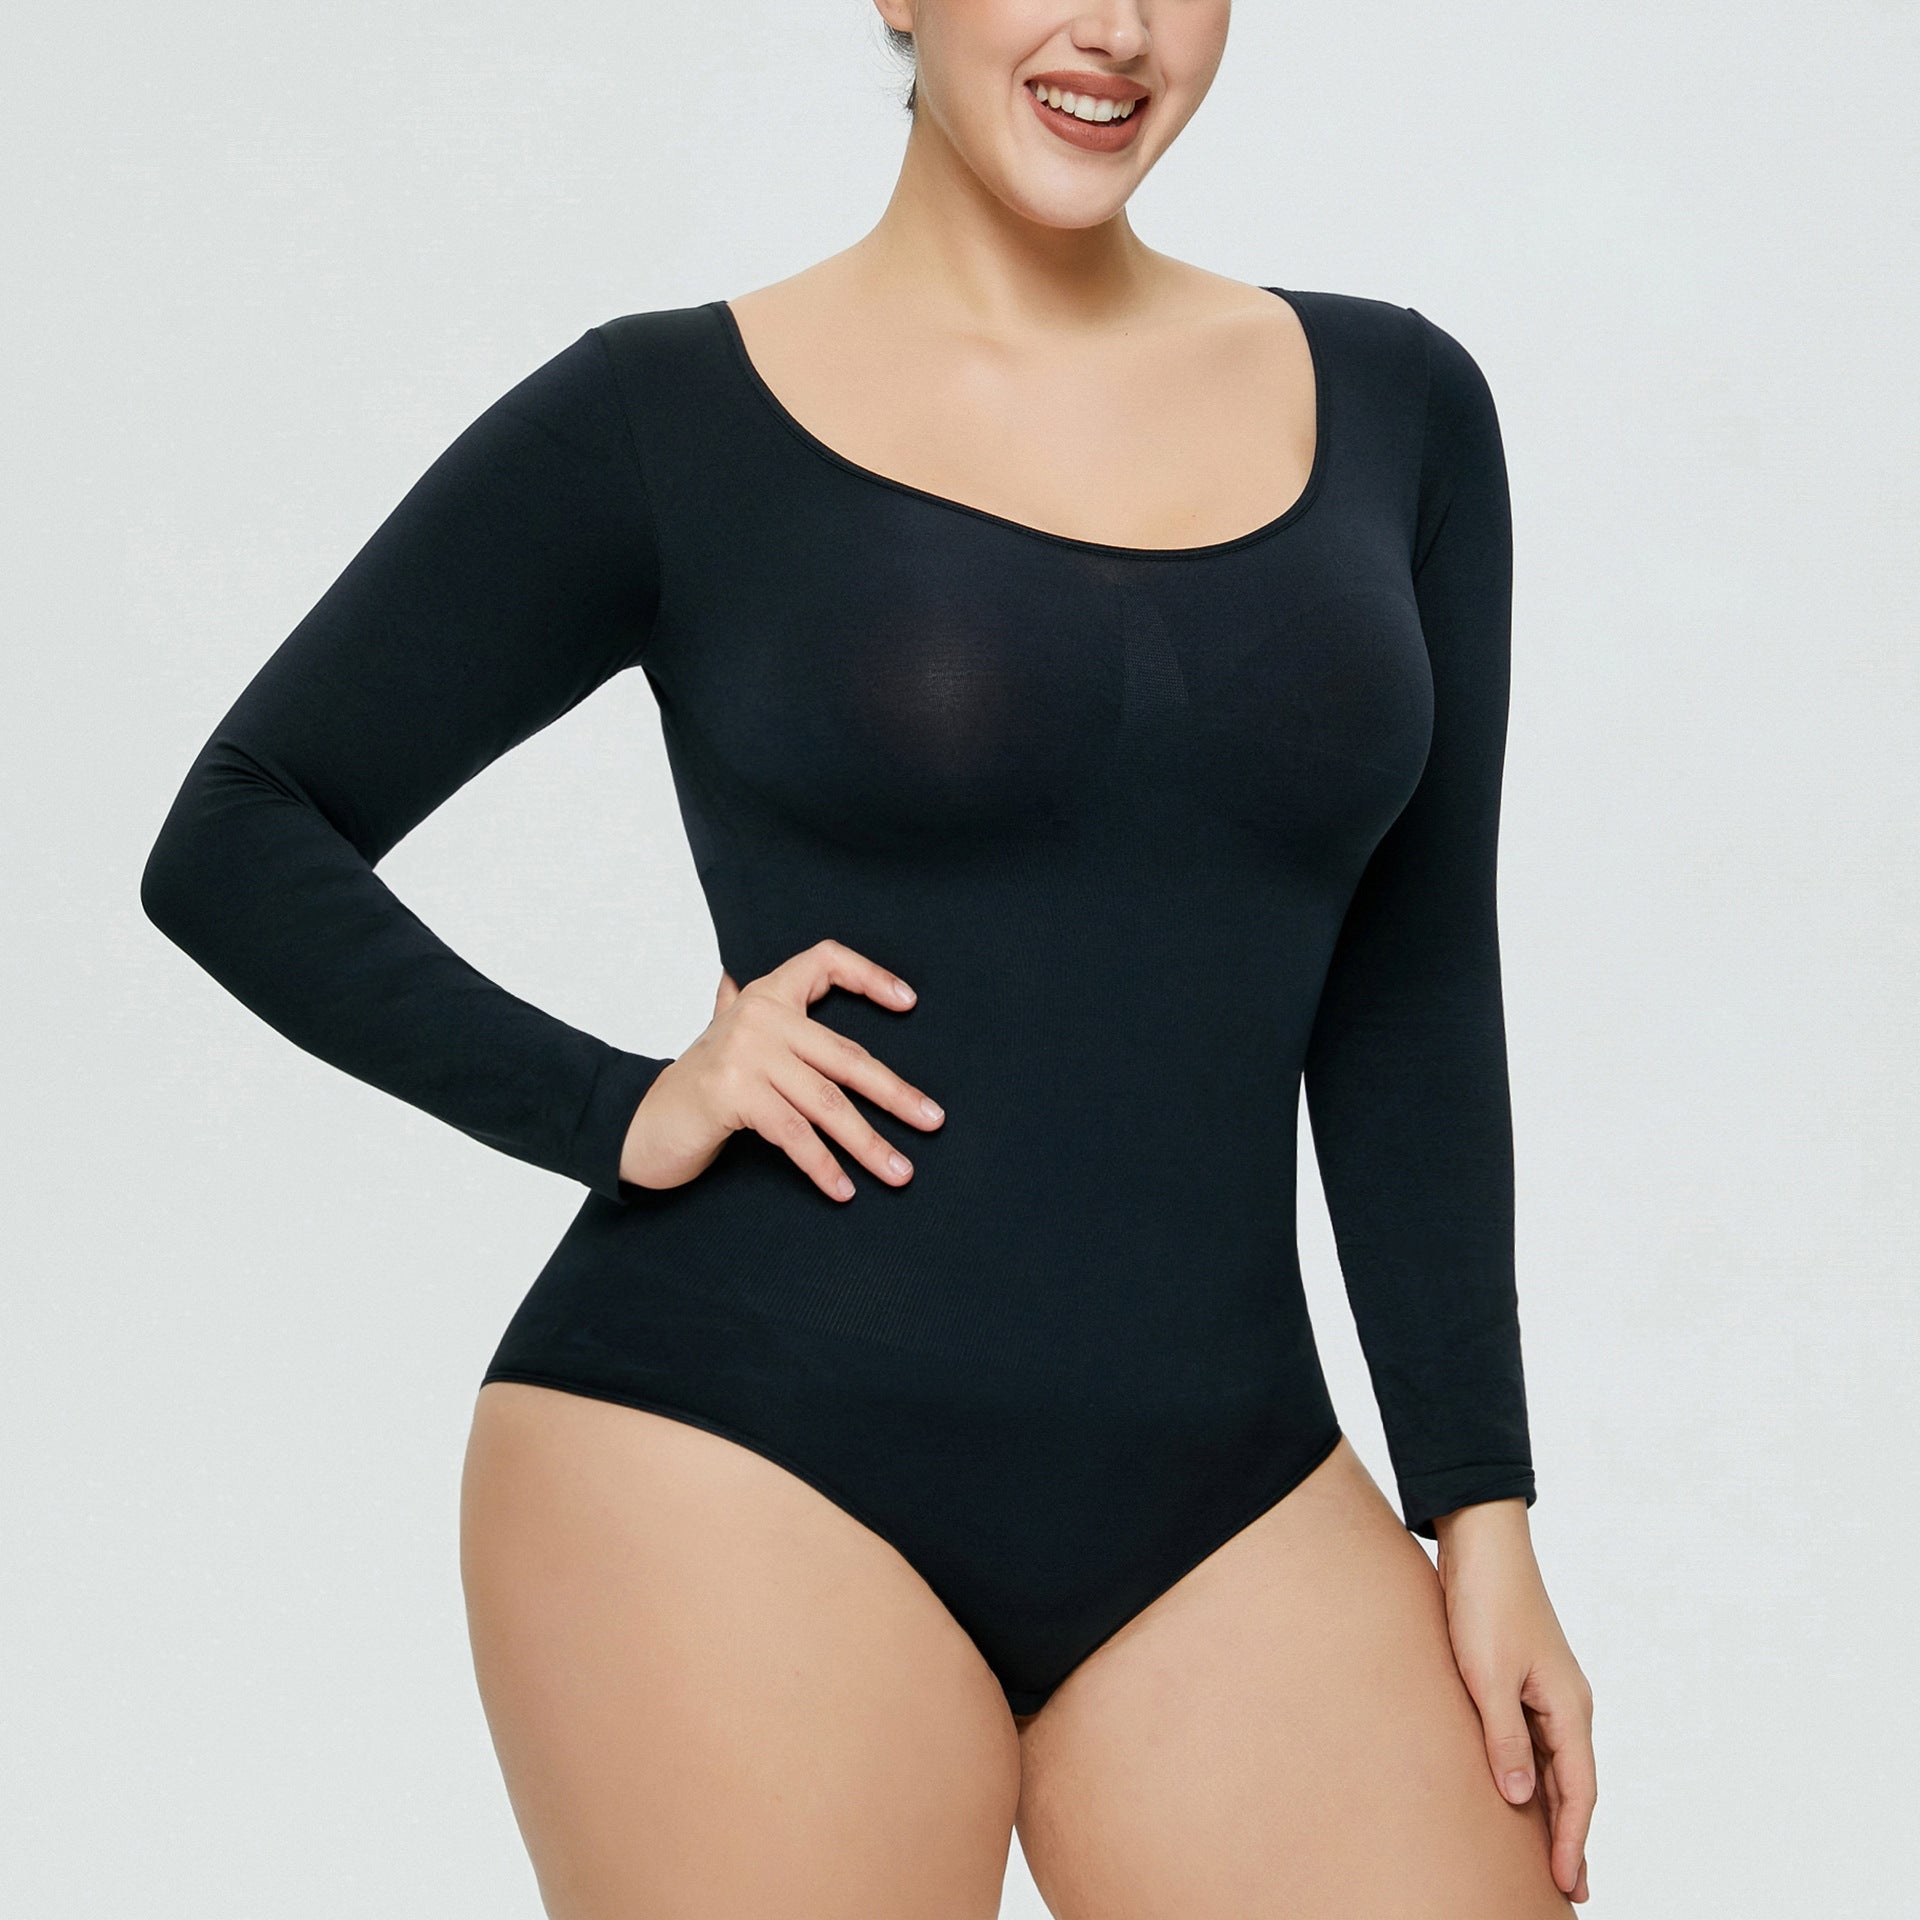 Women's One-piece Bottoming Shirt Long-sleeved Corset Body Shaper Seamless Jumpsuit Home Fitness Yoga Clothes